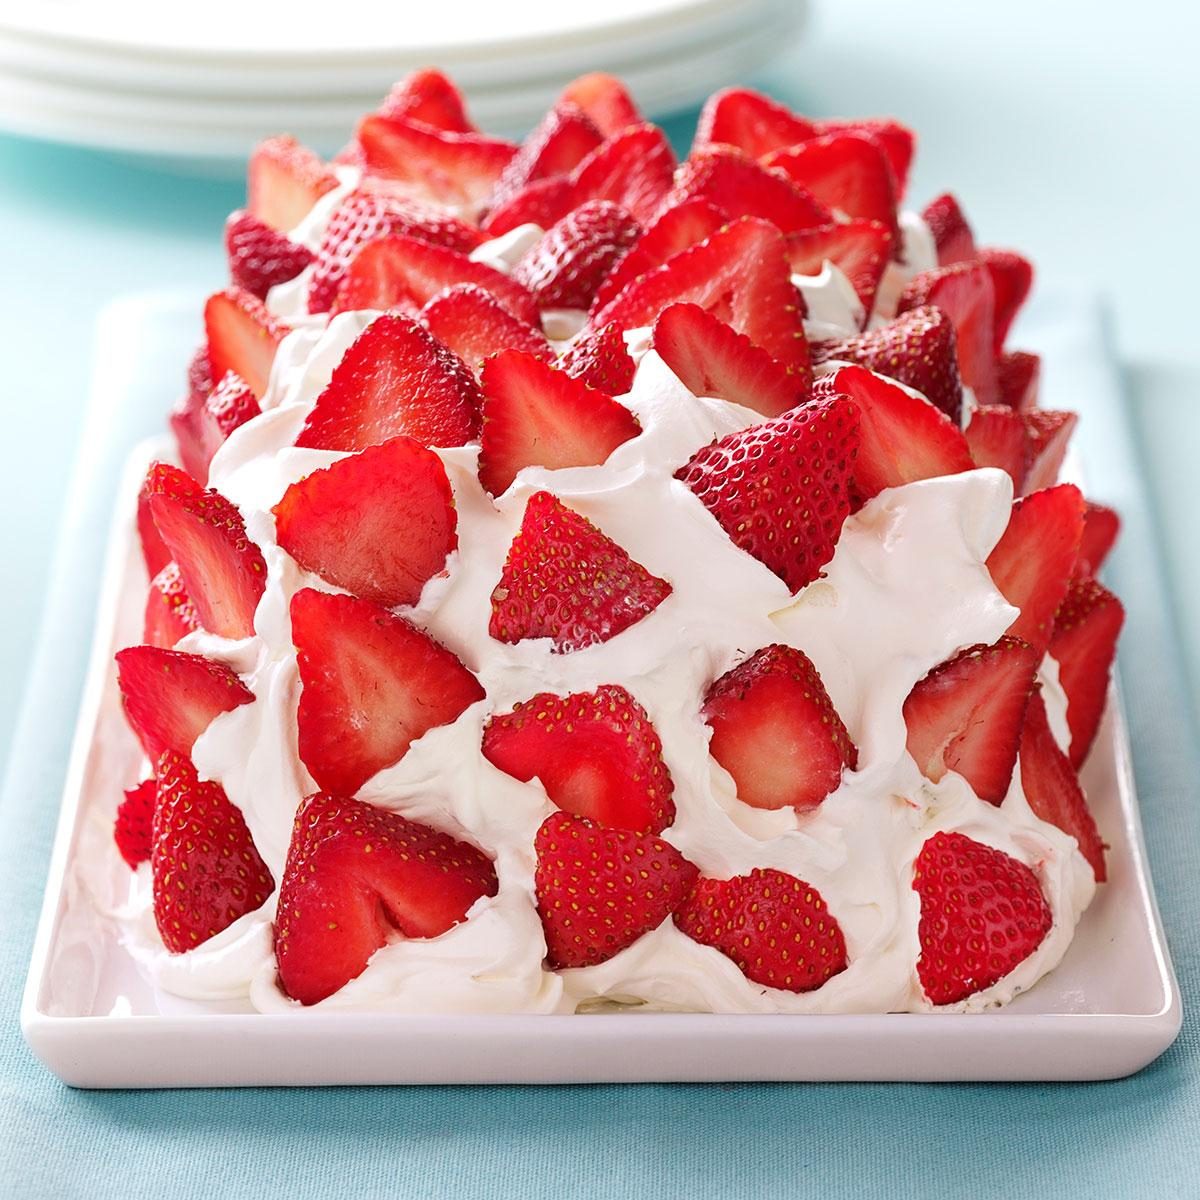 Frozen Strawberry Delight Recipe: How to Make It